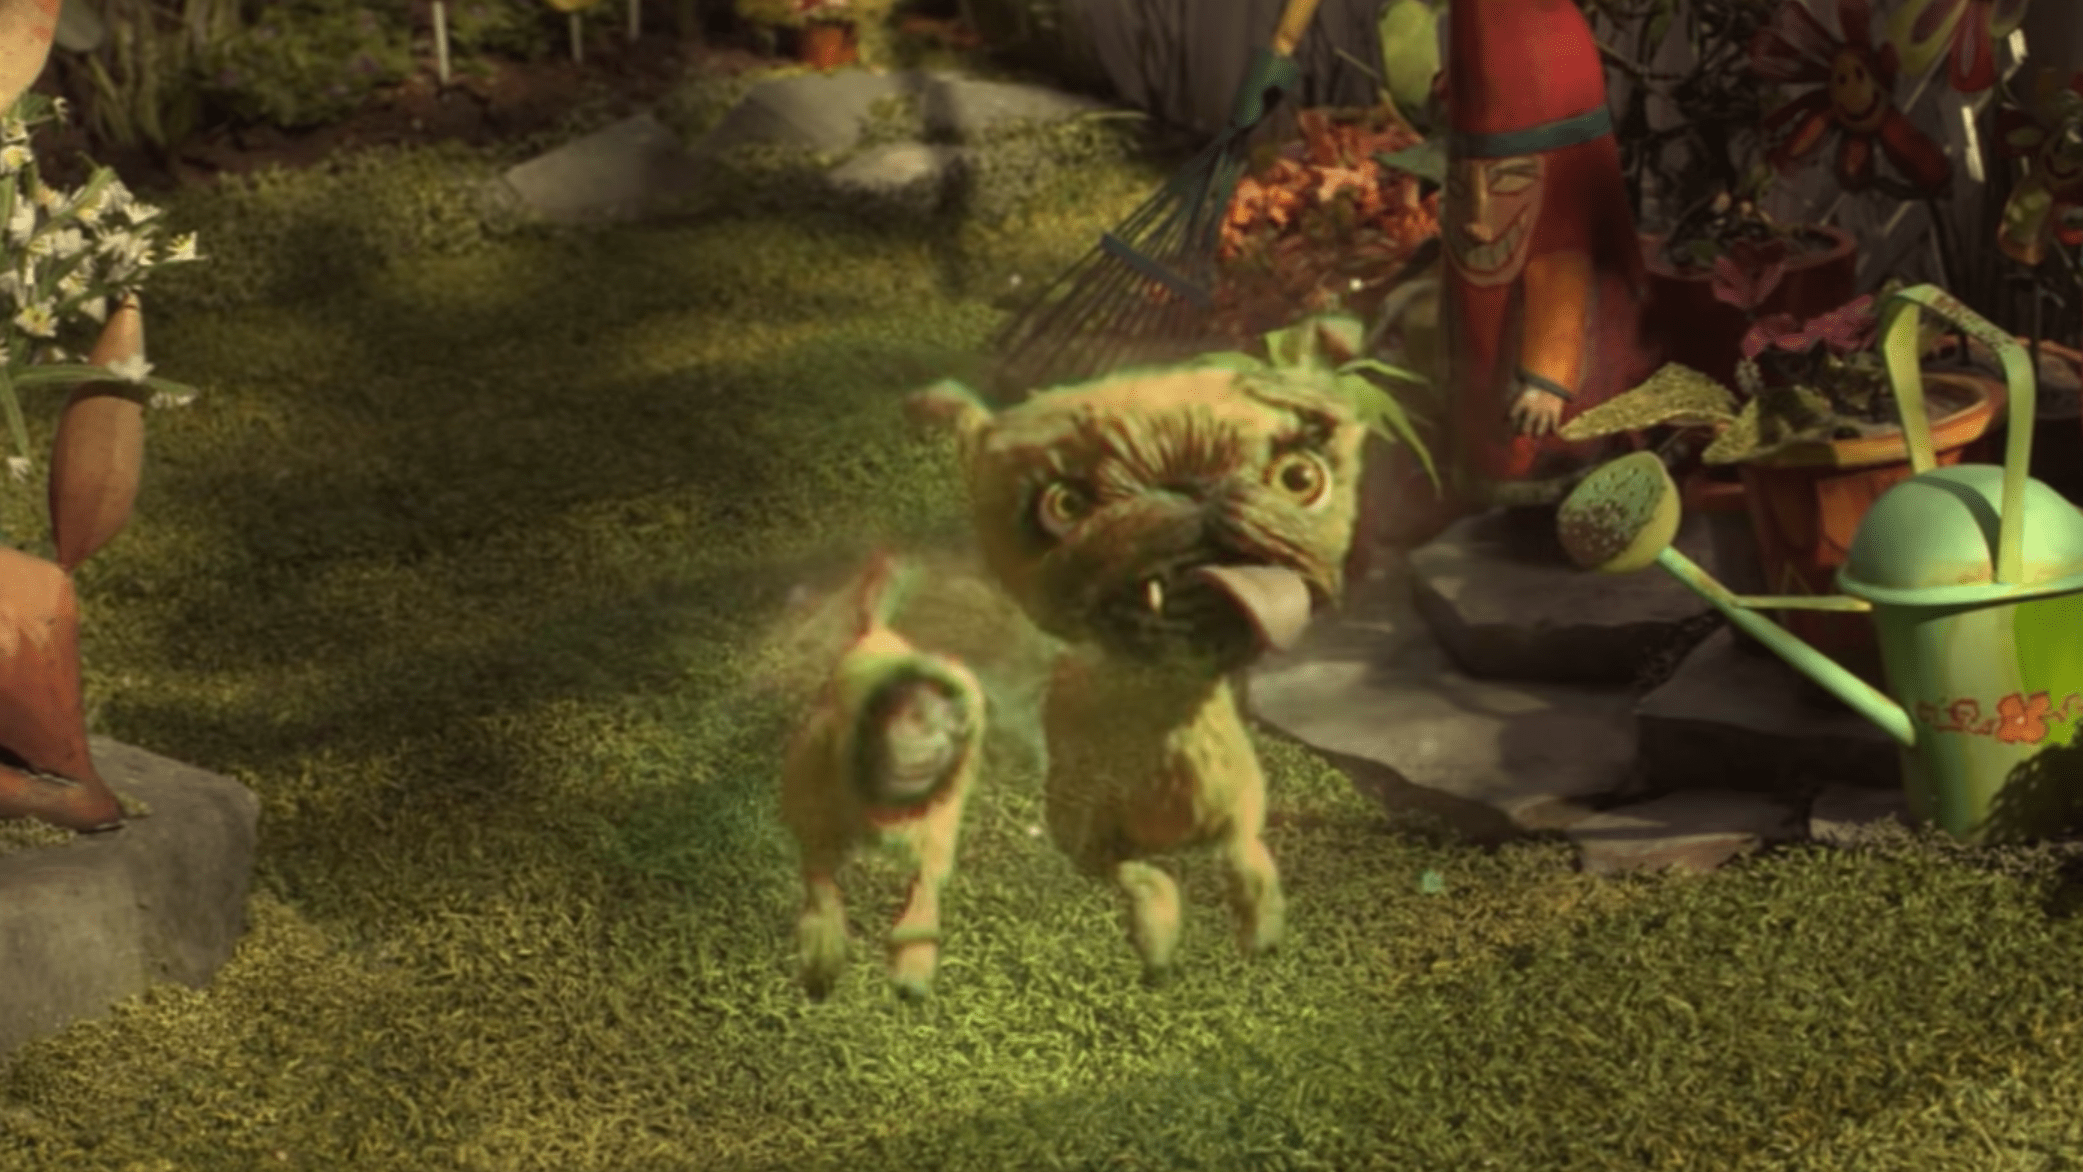 Bub the Ghost Dog is ready to play. (Image: Laika Animation)